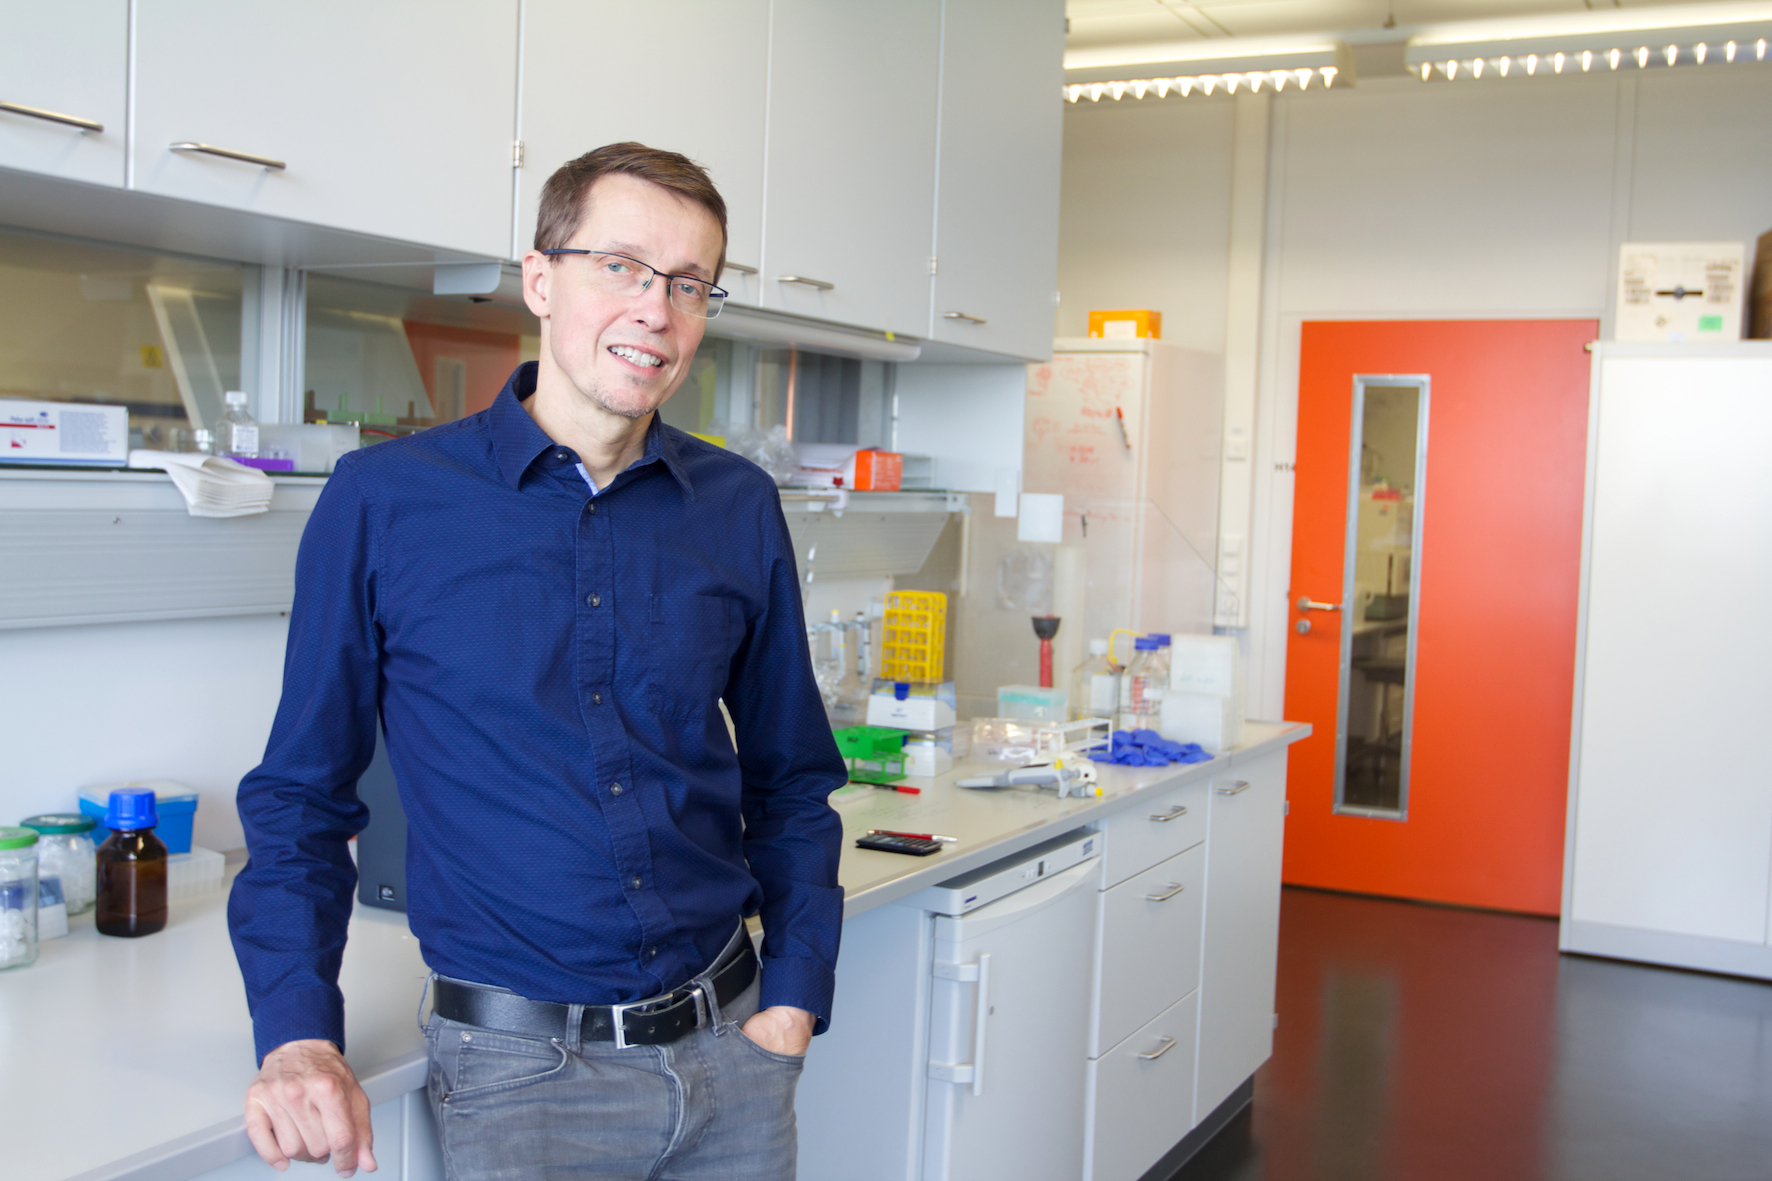 The photo shows Prof. Dr. Andreas Peschel standing in front of a laboratory bench